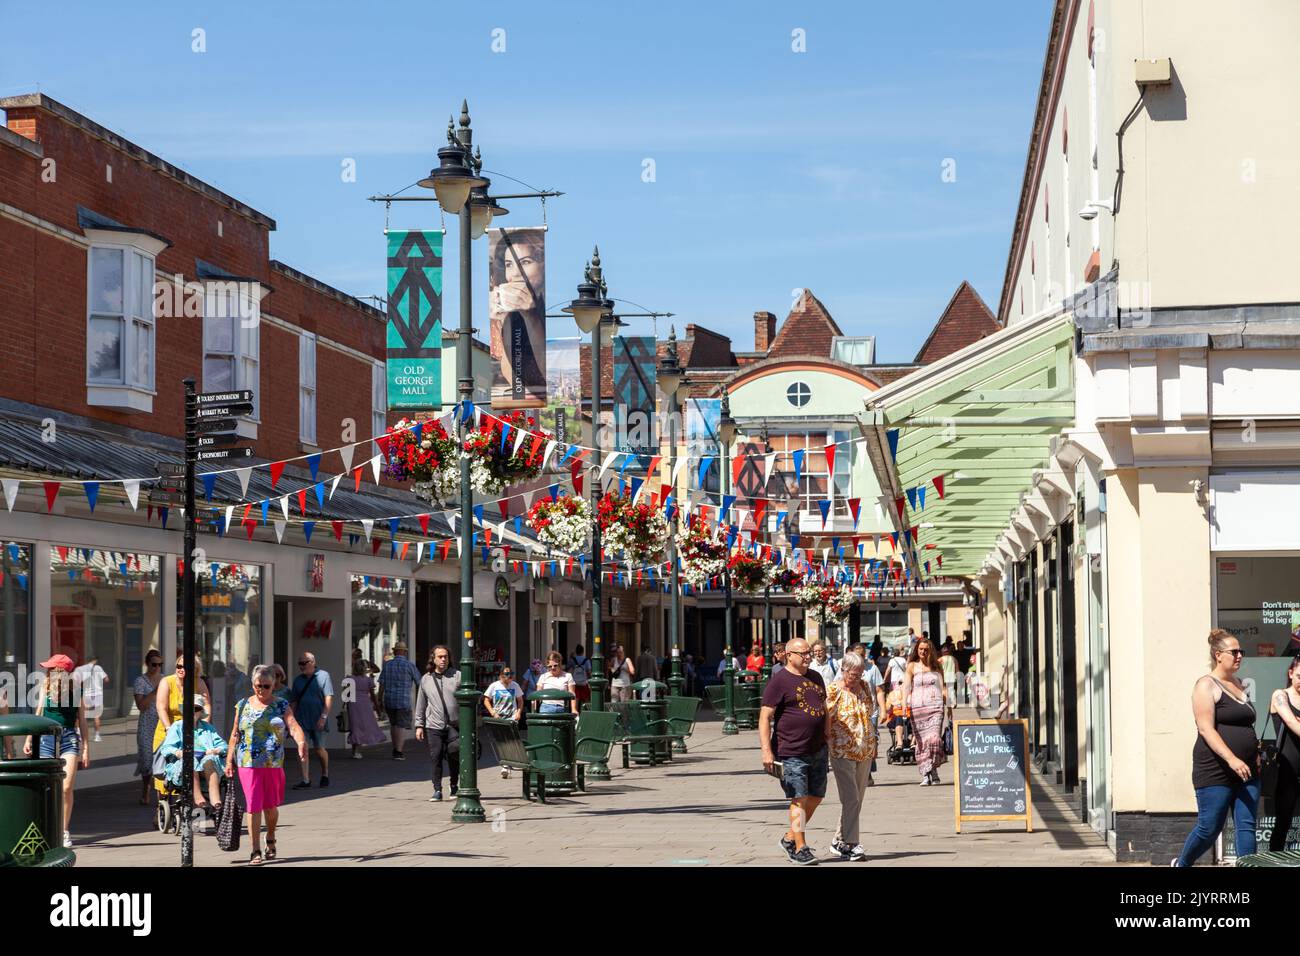 Centro commerciale Old George Mall, High Street, Salisbury, Wiltshire, Inghilterra Foto Stock